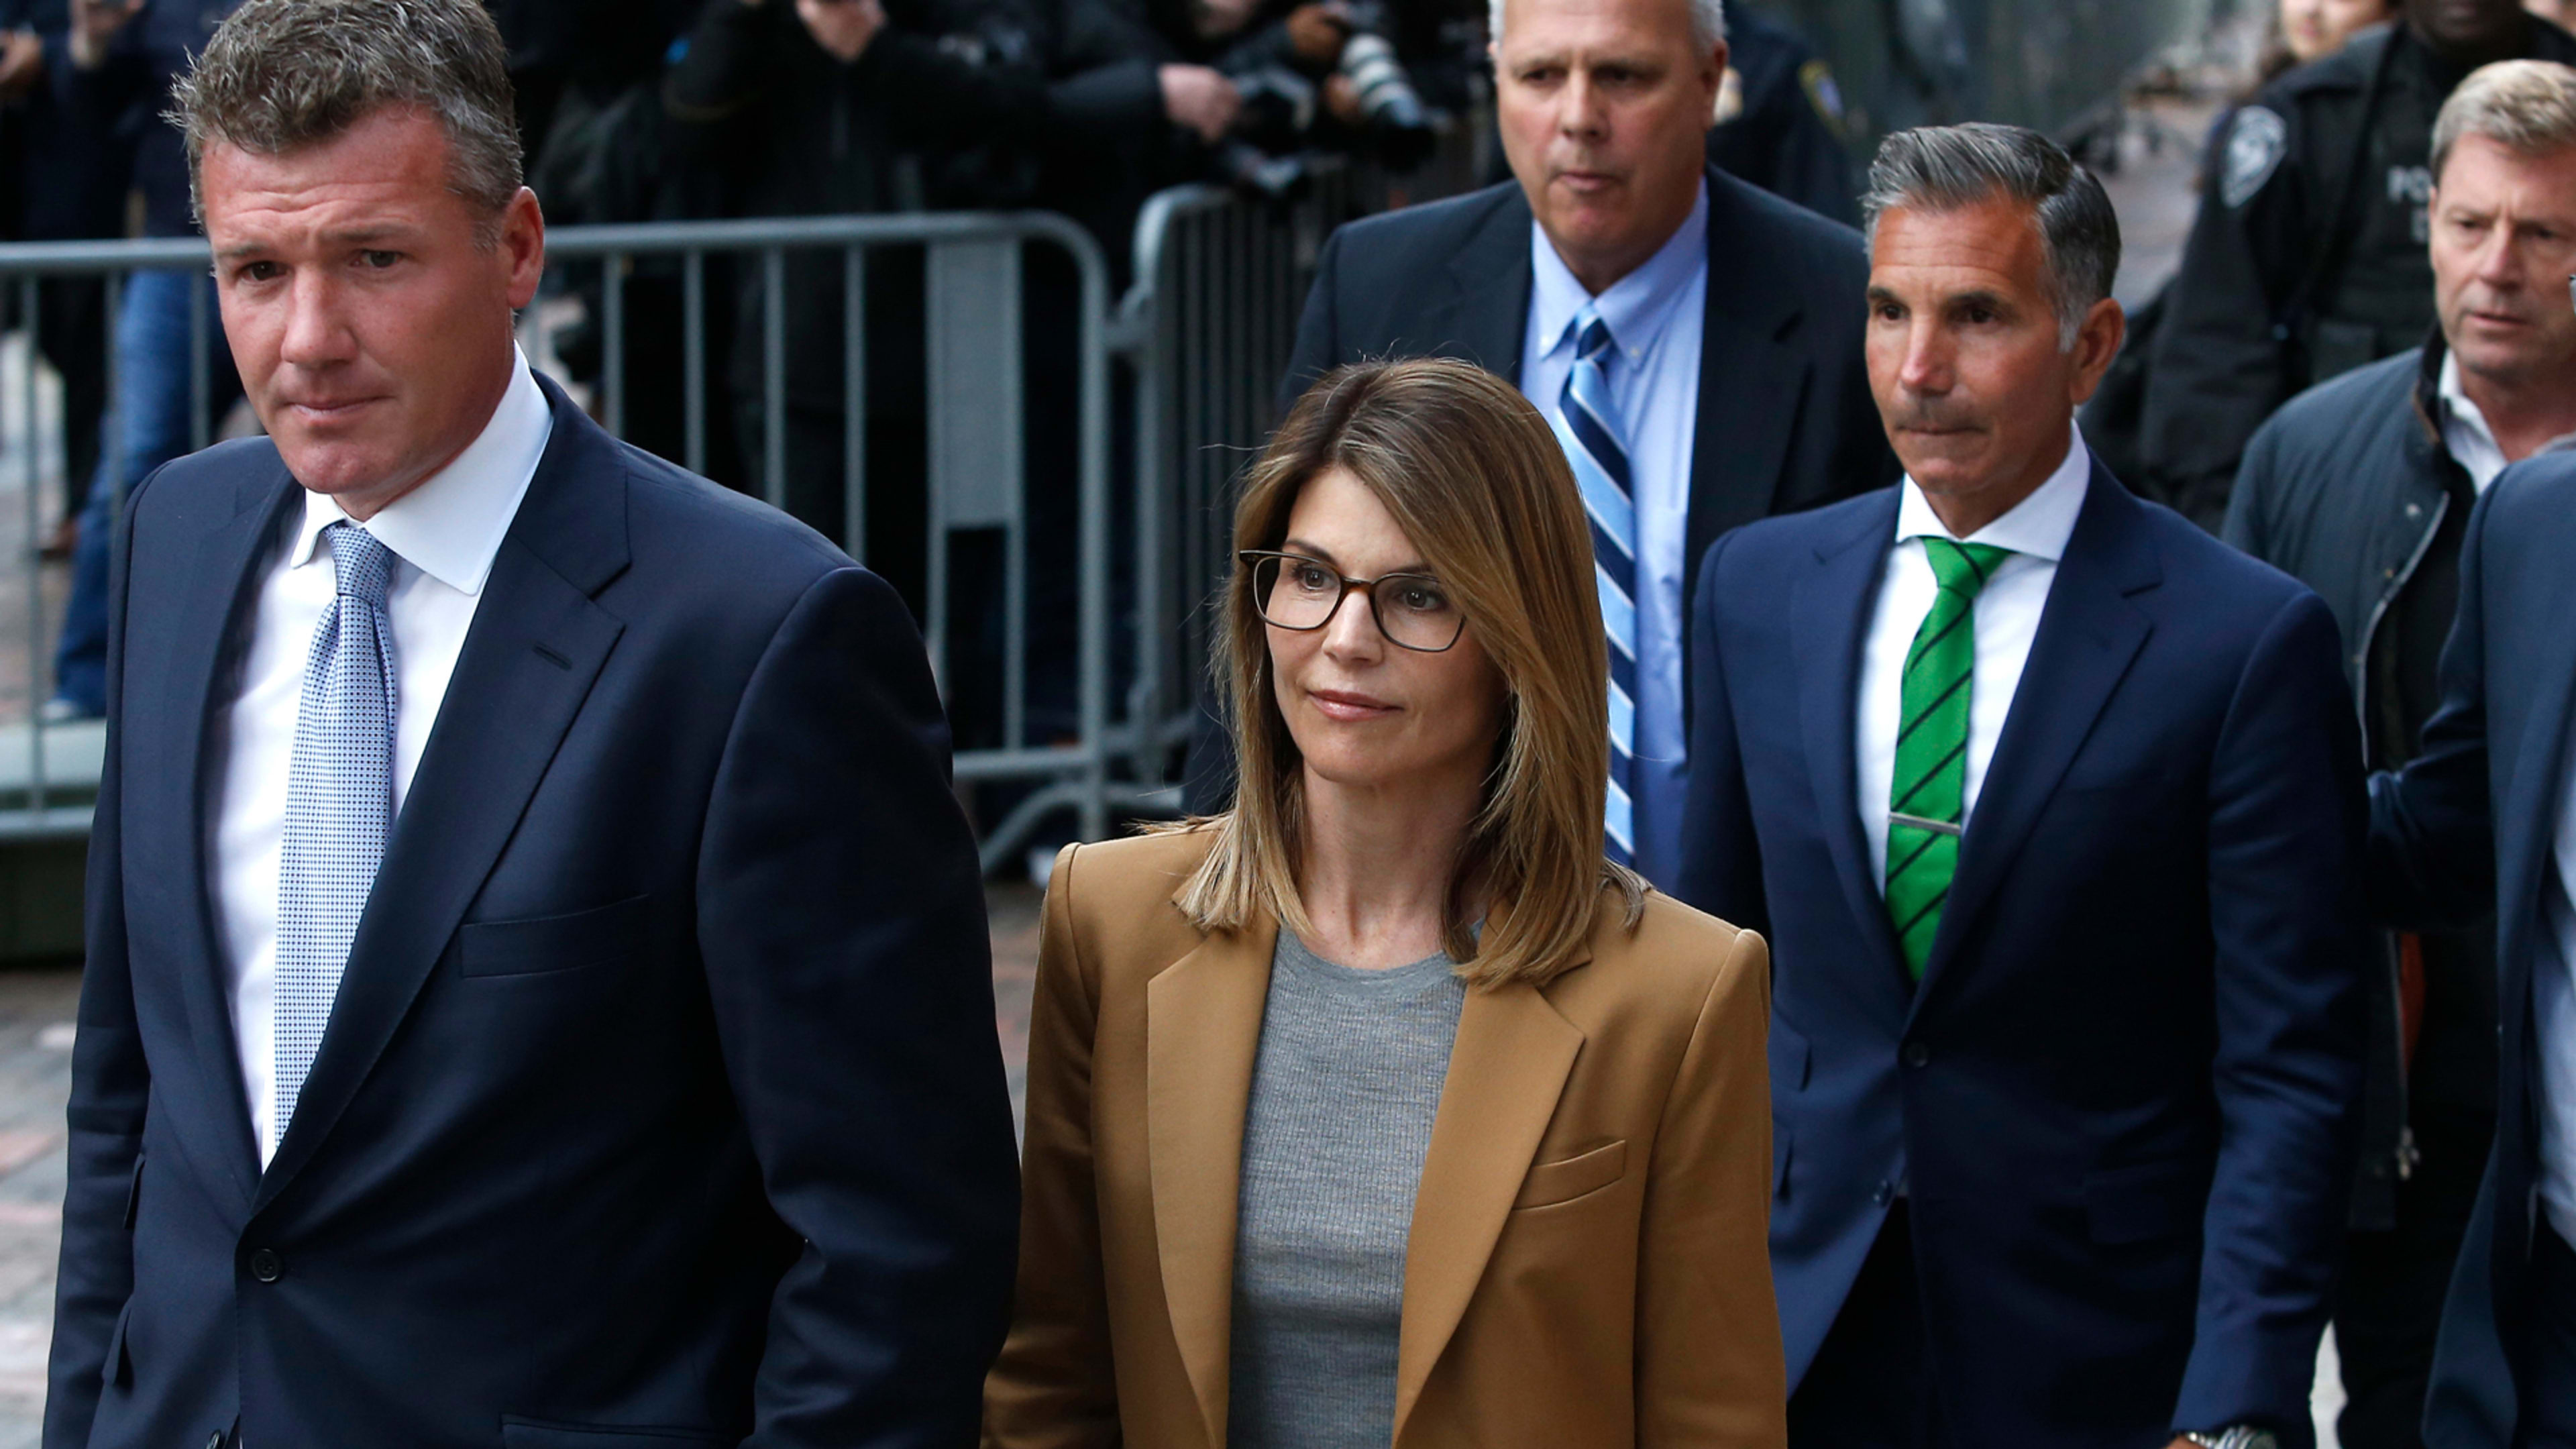 Lori Loughlin pleads not guilty in college admissions scandal